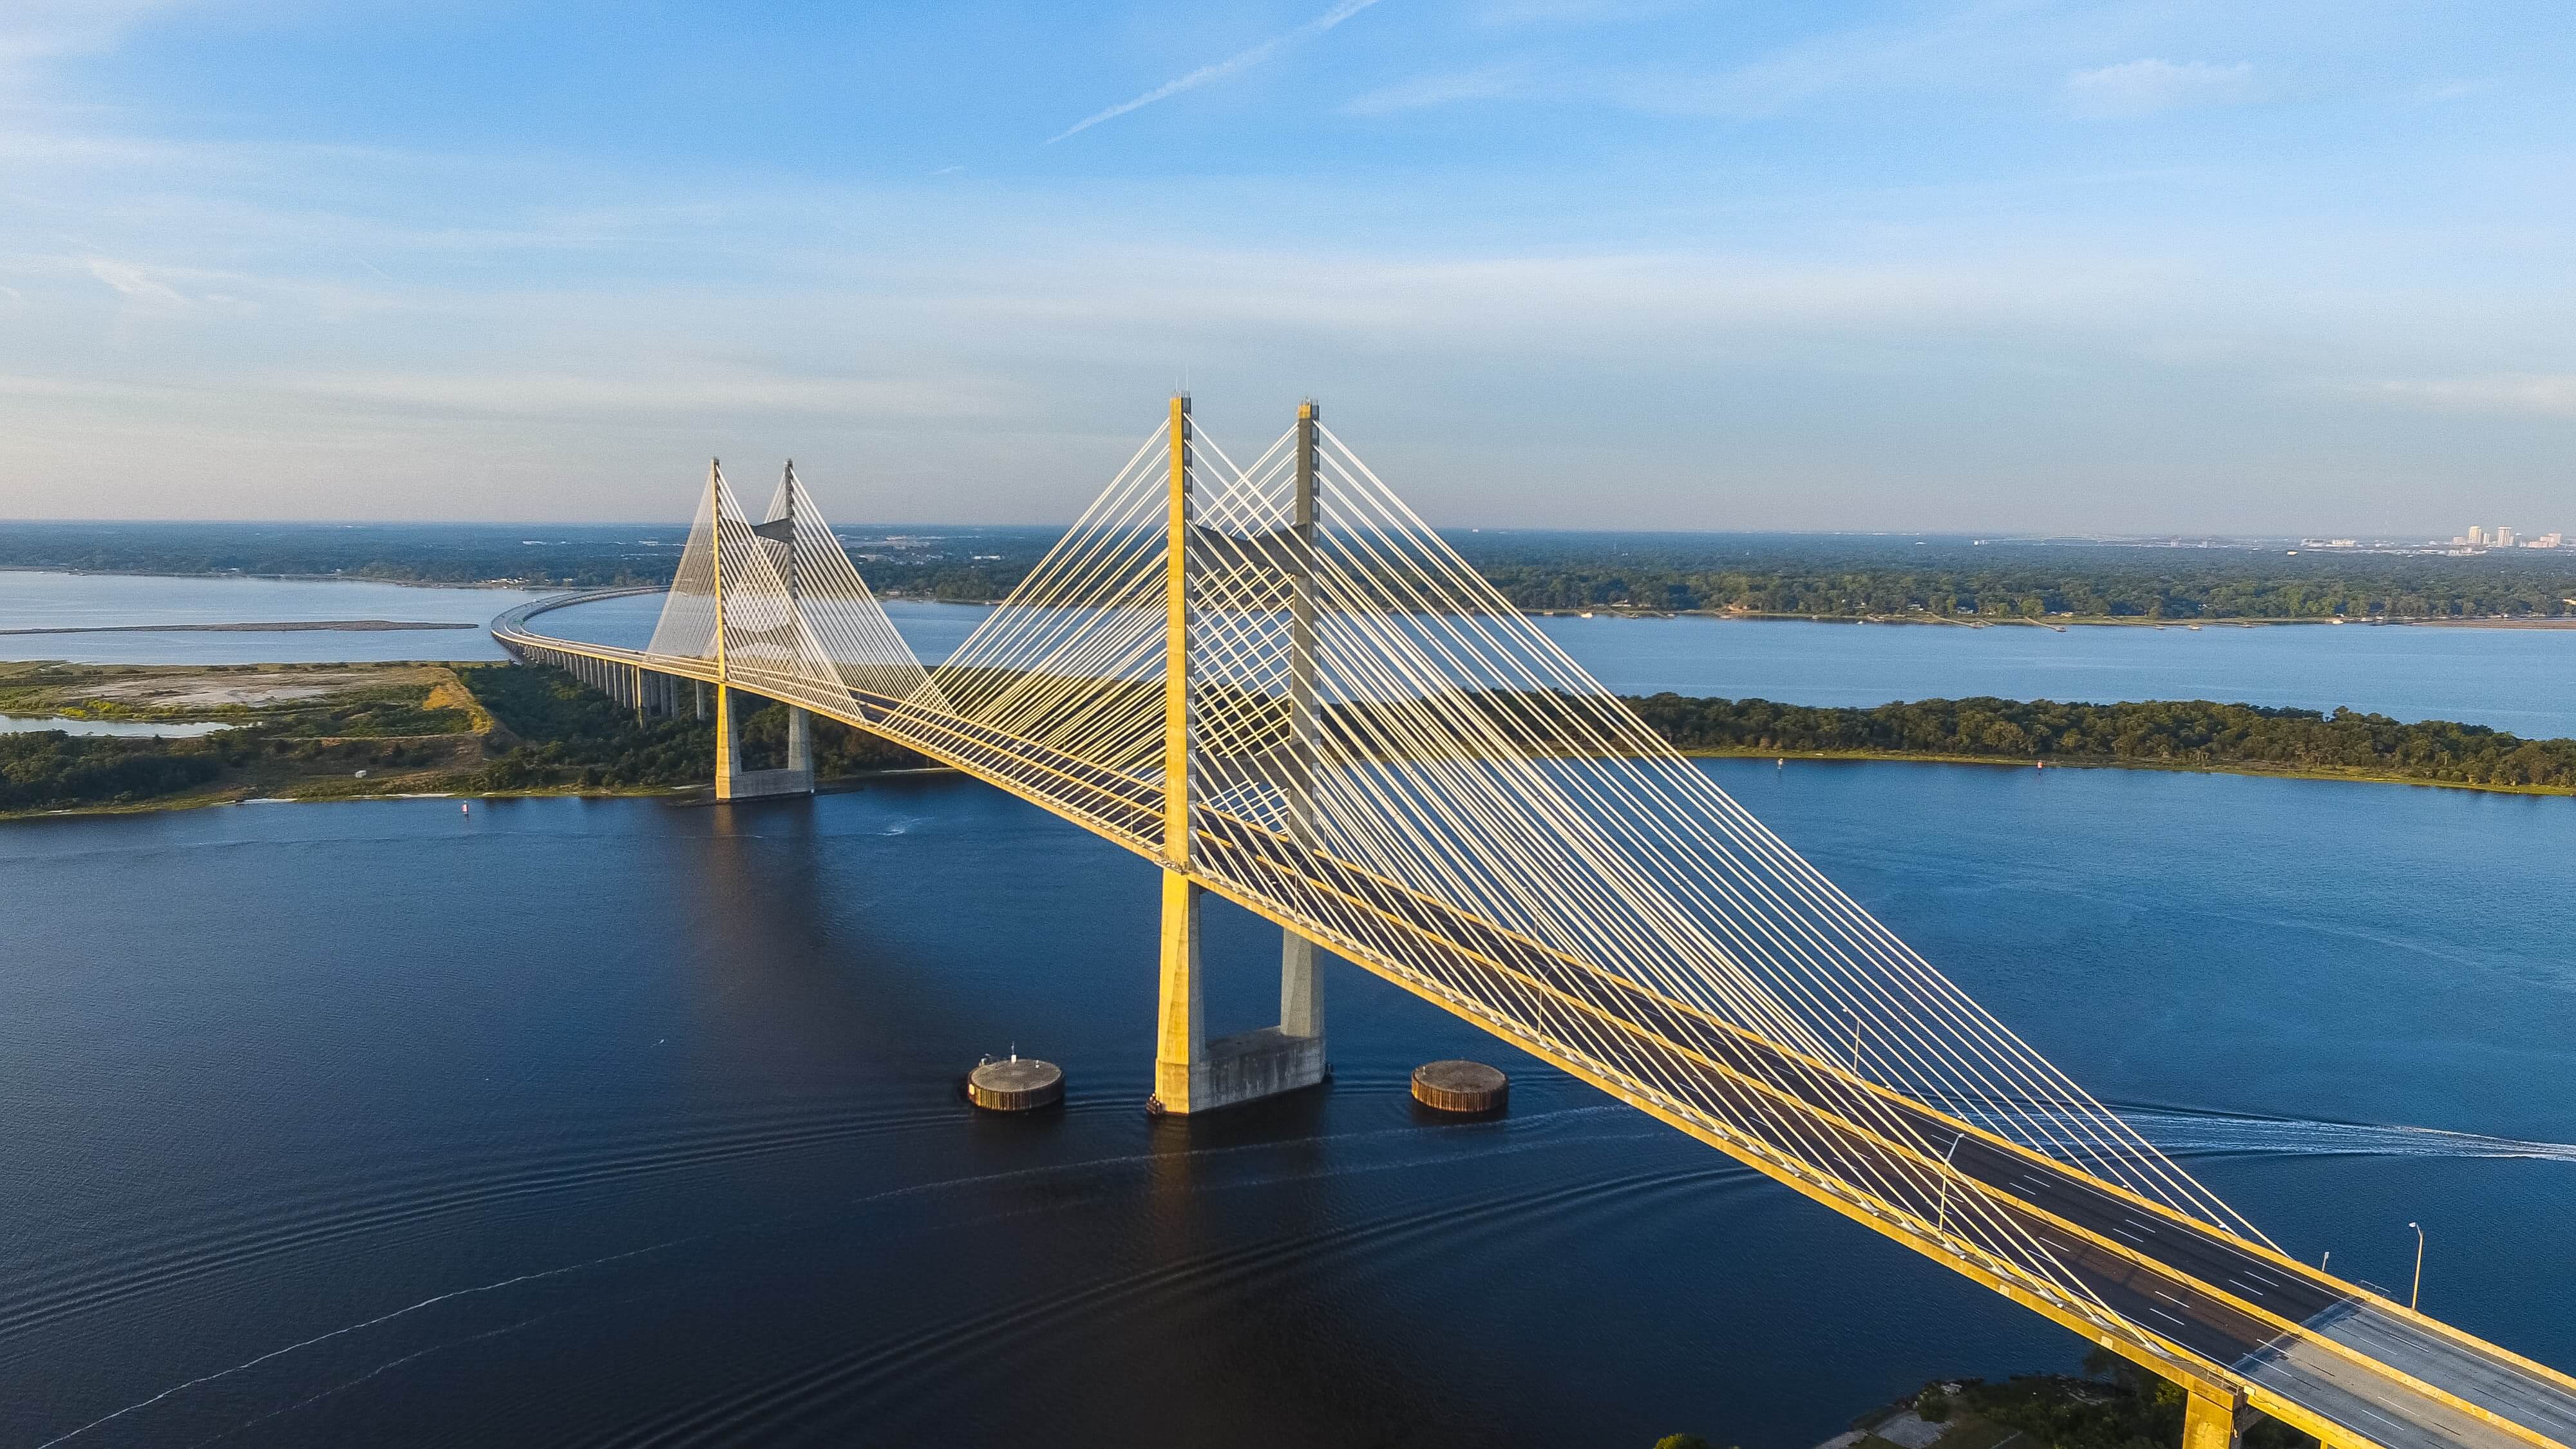 Bridges and viaducts: Connection, communication and technology through architecture